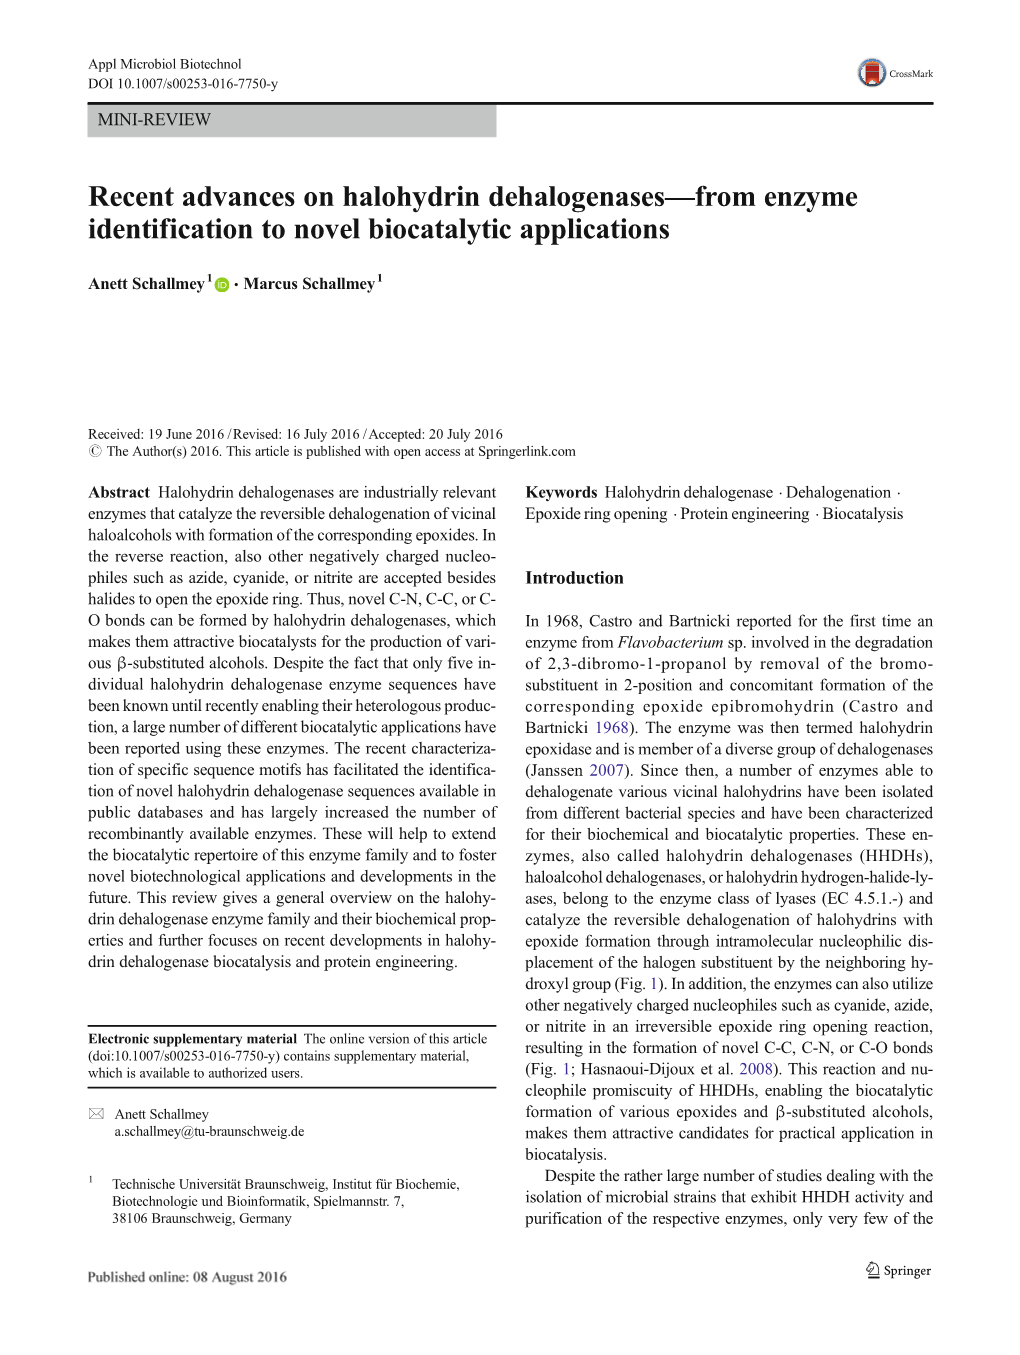 Recent Advances on Halohydrin Dehalogenases—From Enzyme Identification to Novel Biocatalytic Applications